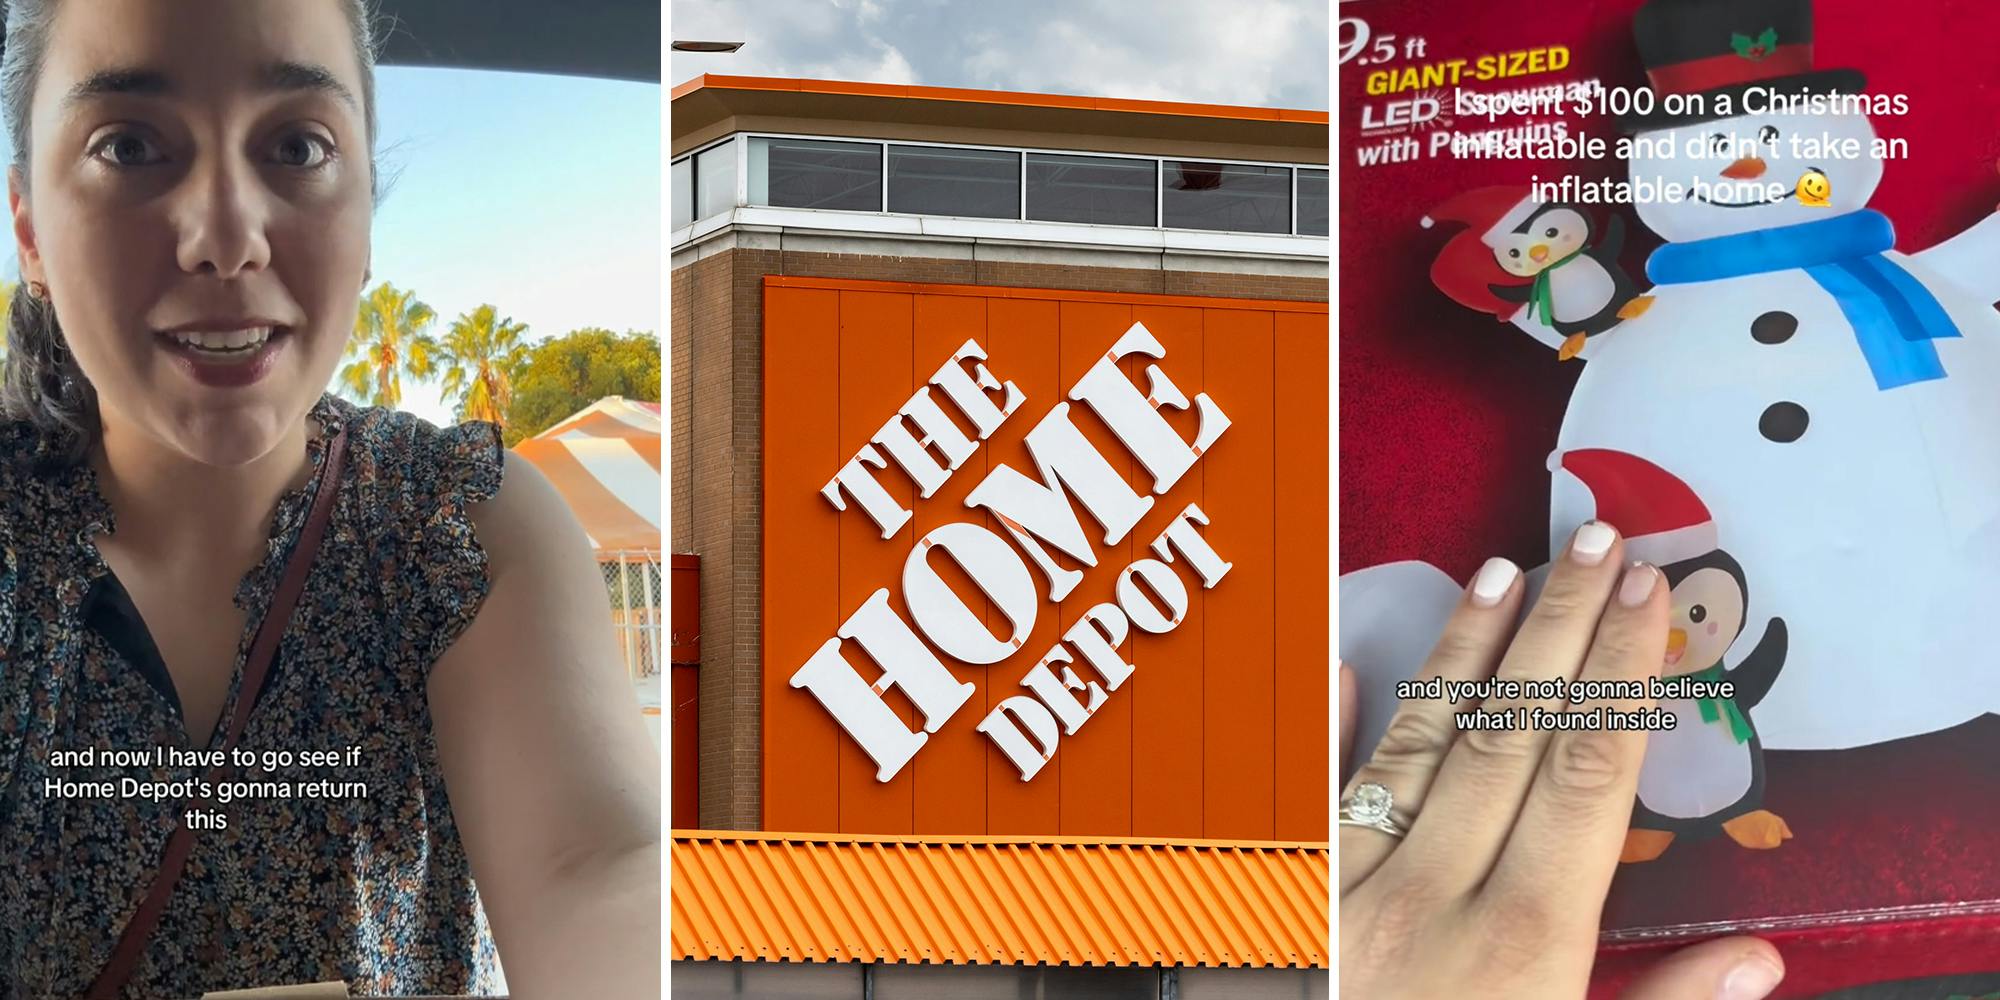 Customer buys inflatable from Home Depot for $100. Nothing’s in the box when she gets home